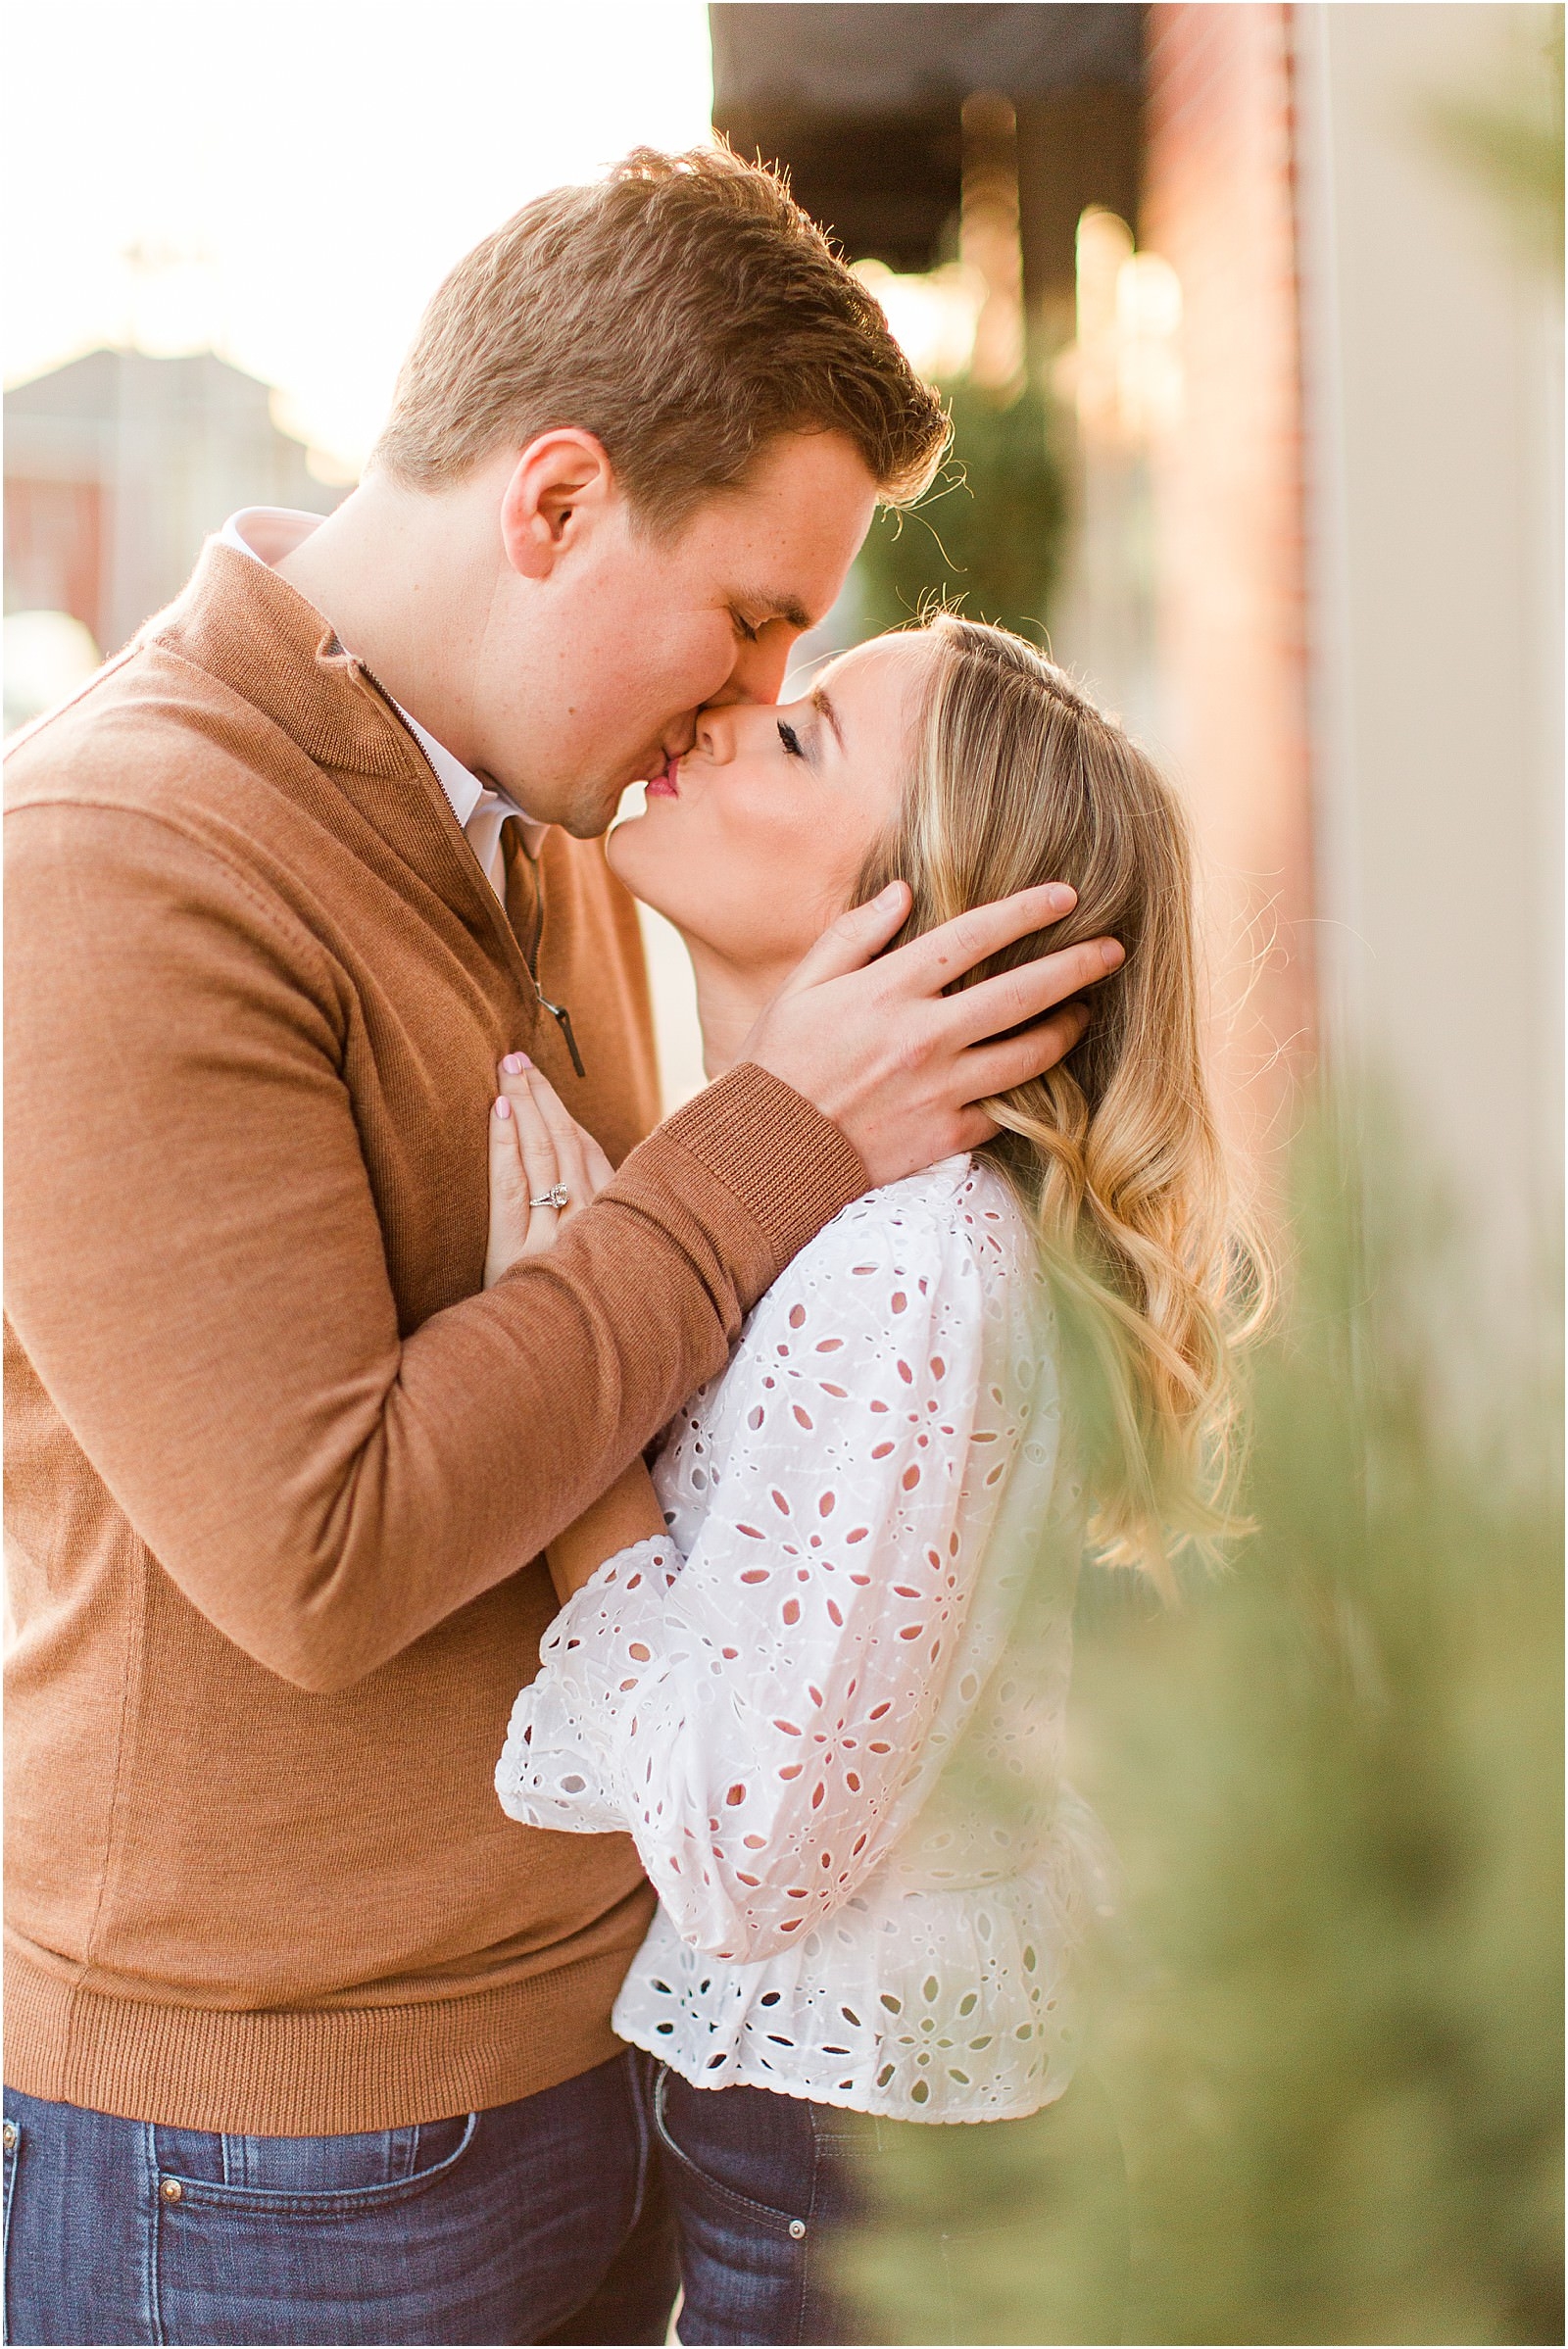 Madison and Christaan | A 20 West Engagement Session in Downto wn Newburgh | Bret and Brandie Photography047.jpg